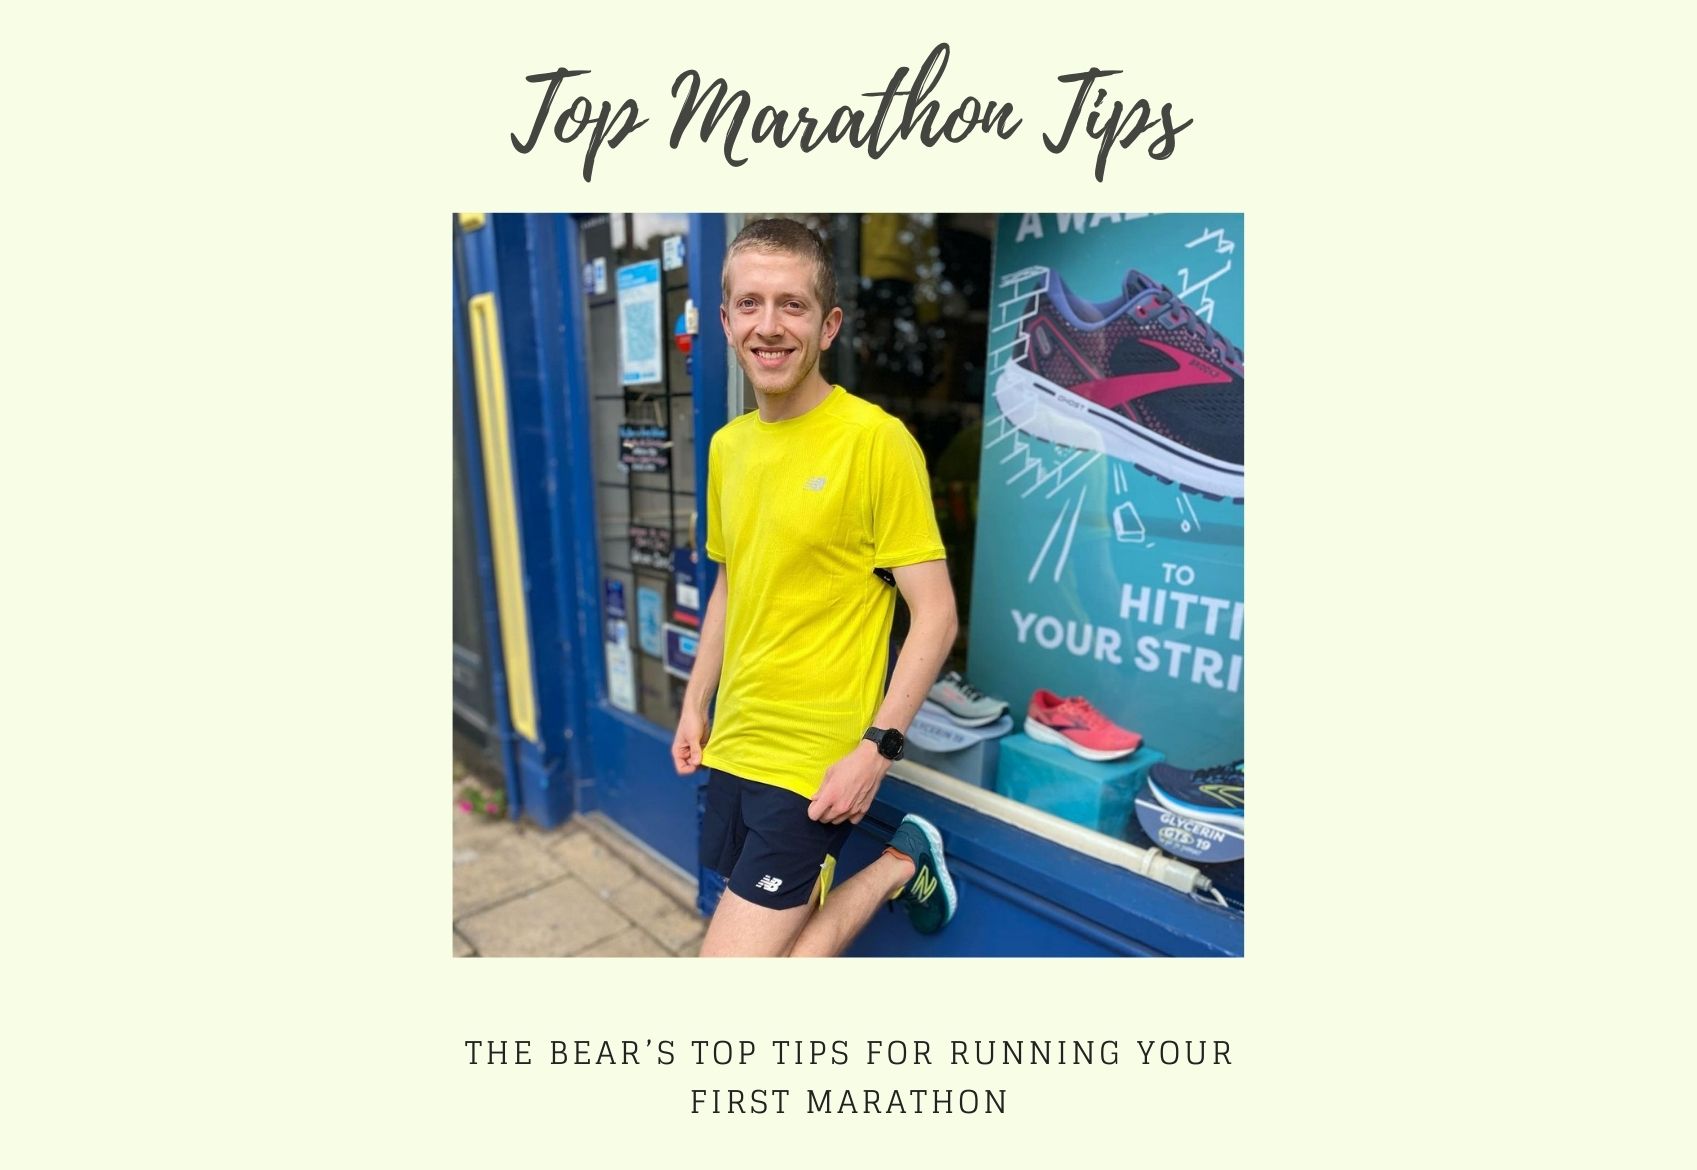 The Bear’s TOP Tips for Running your first Marathon